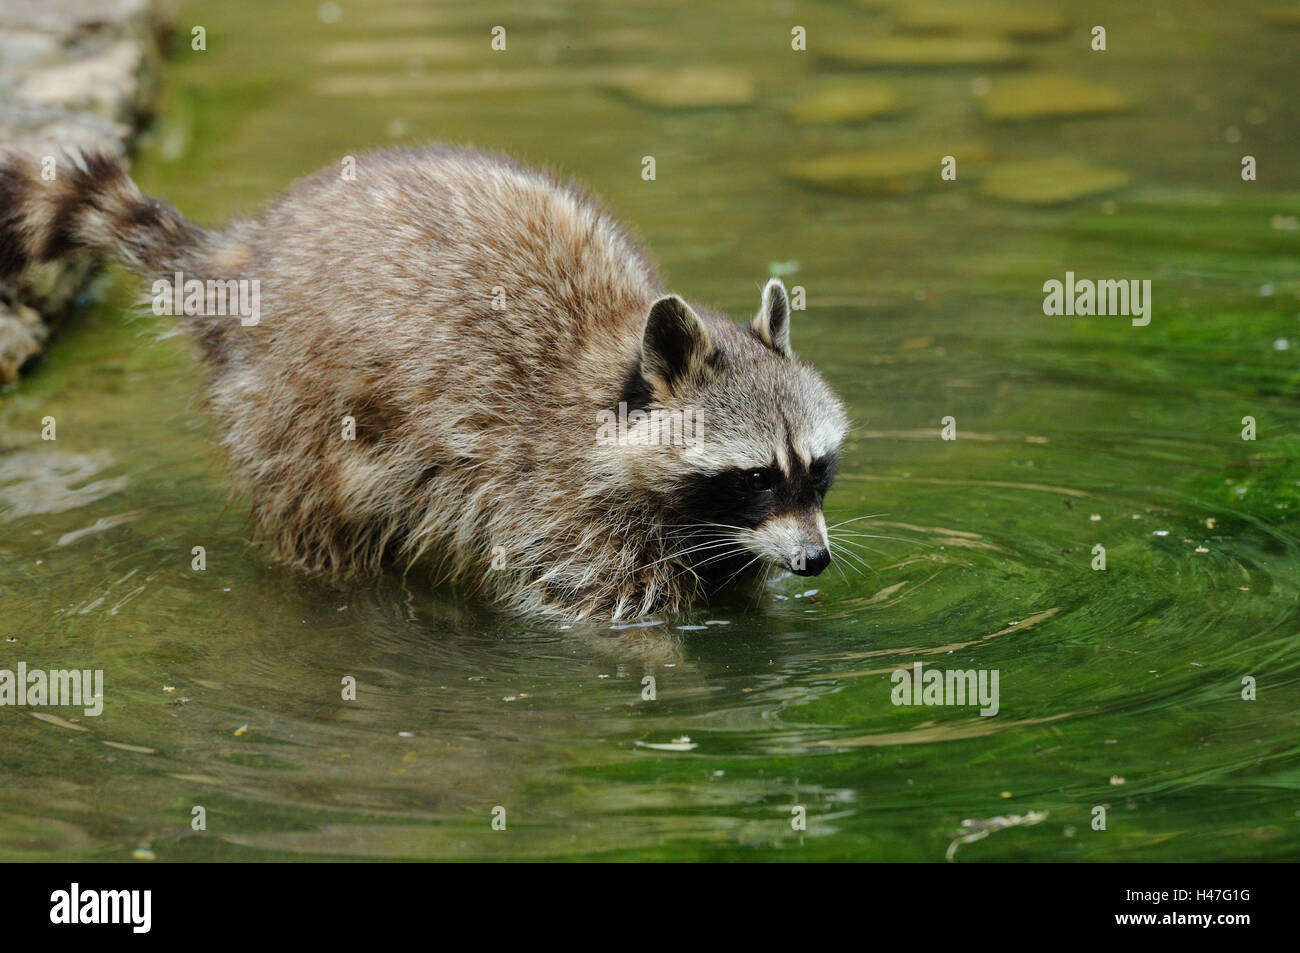 Racoon, Procyon lotor, water, side view, stand, Stock Photo